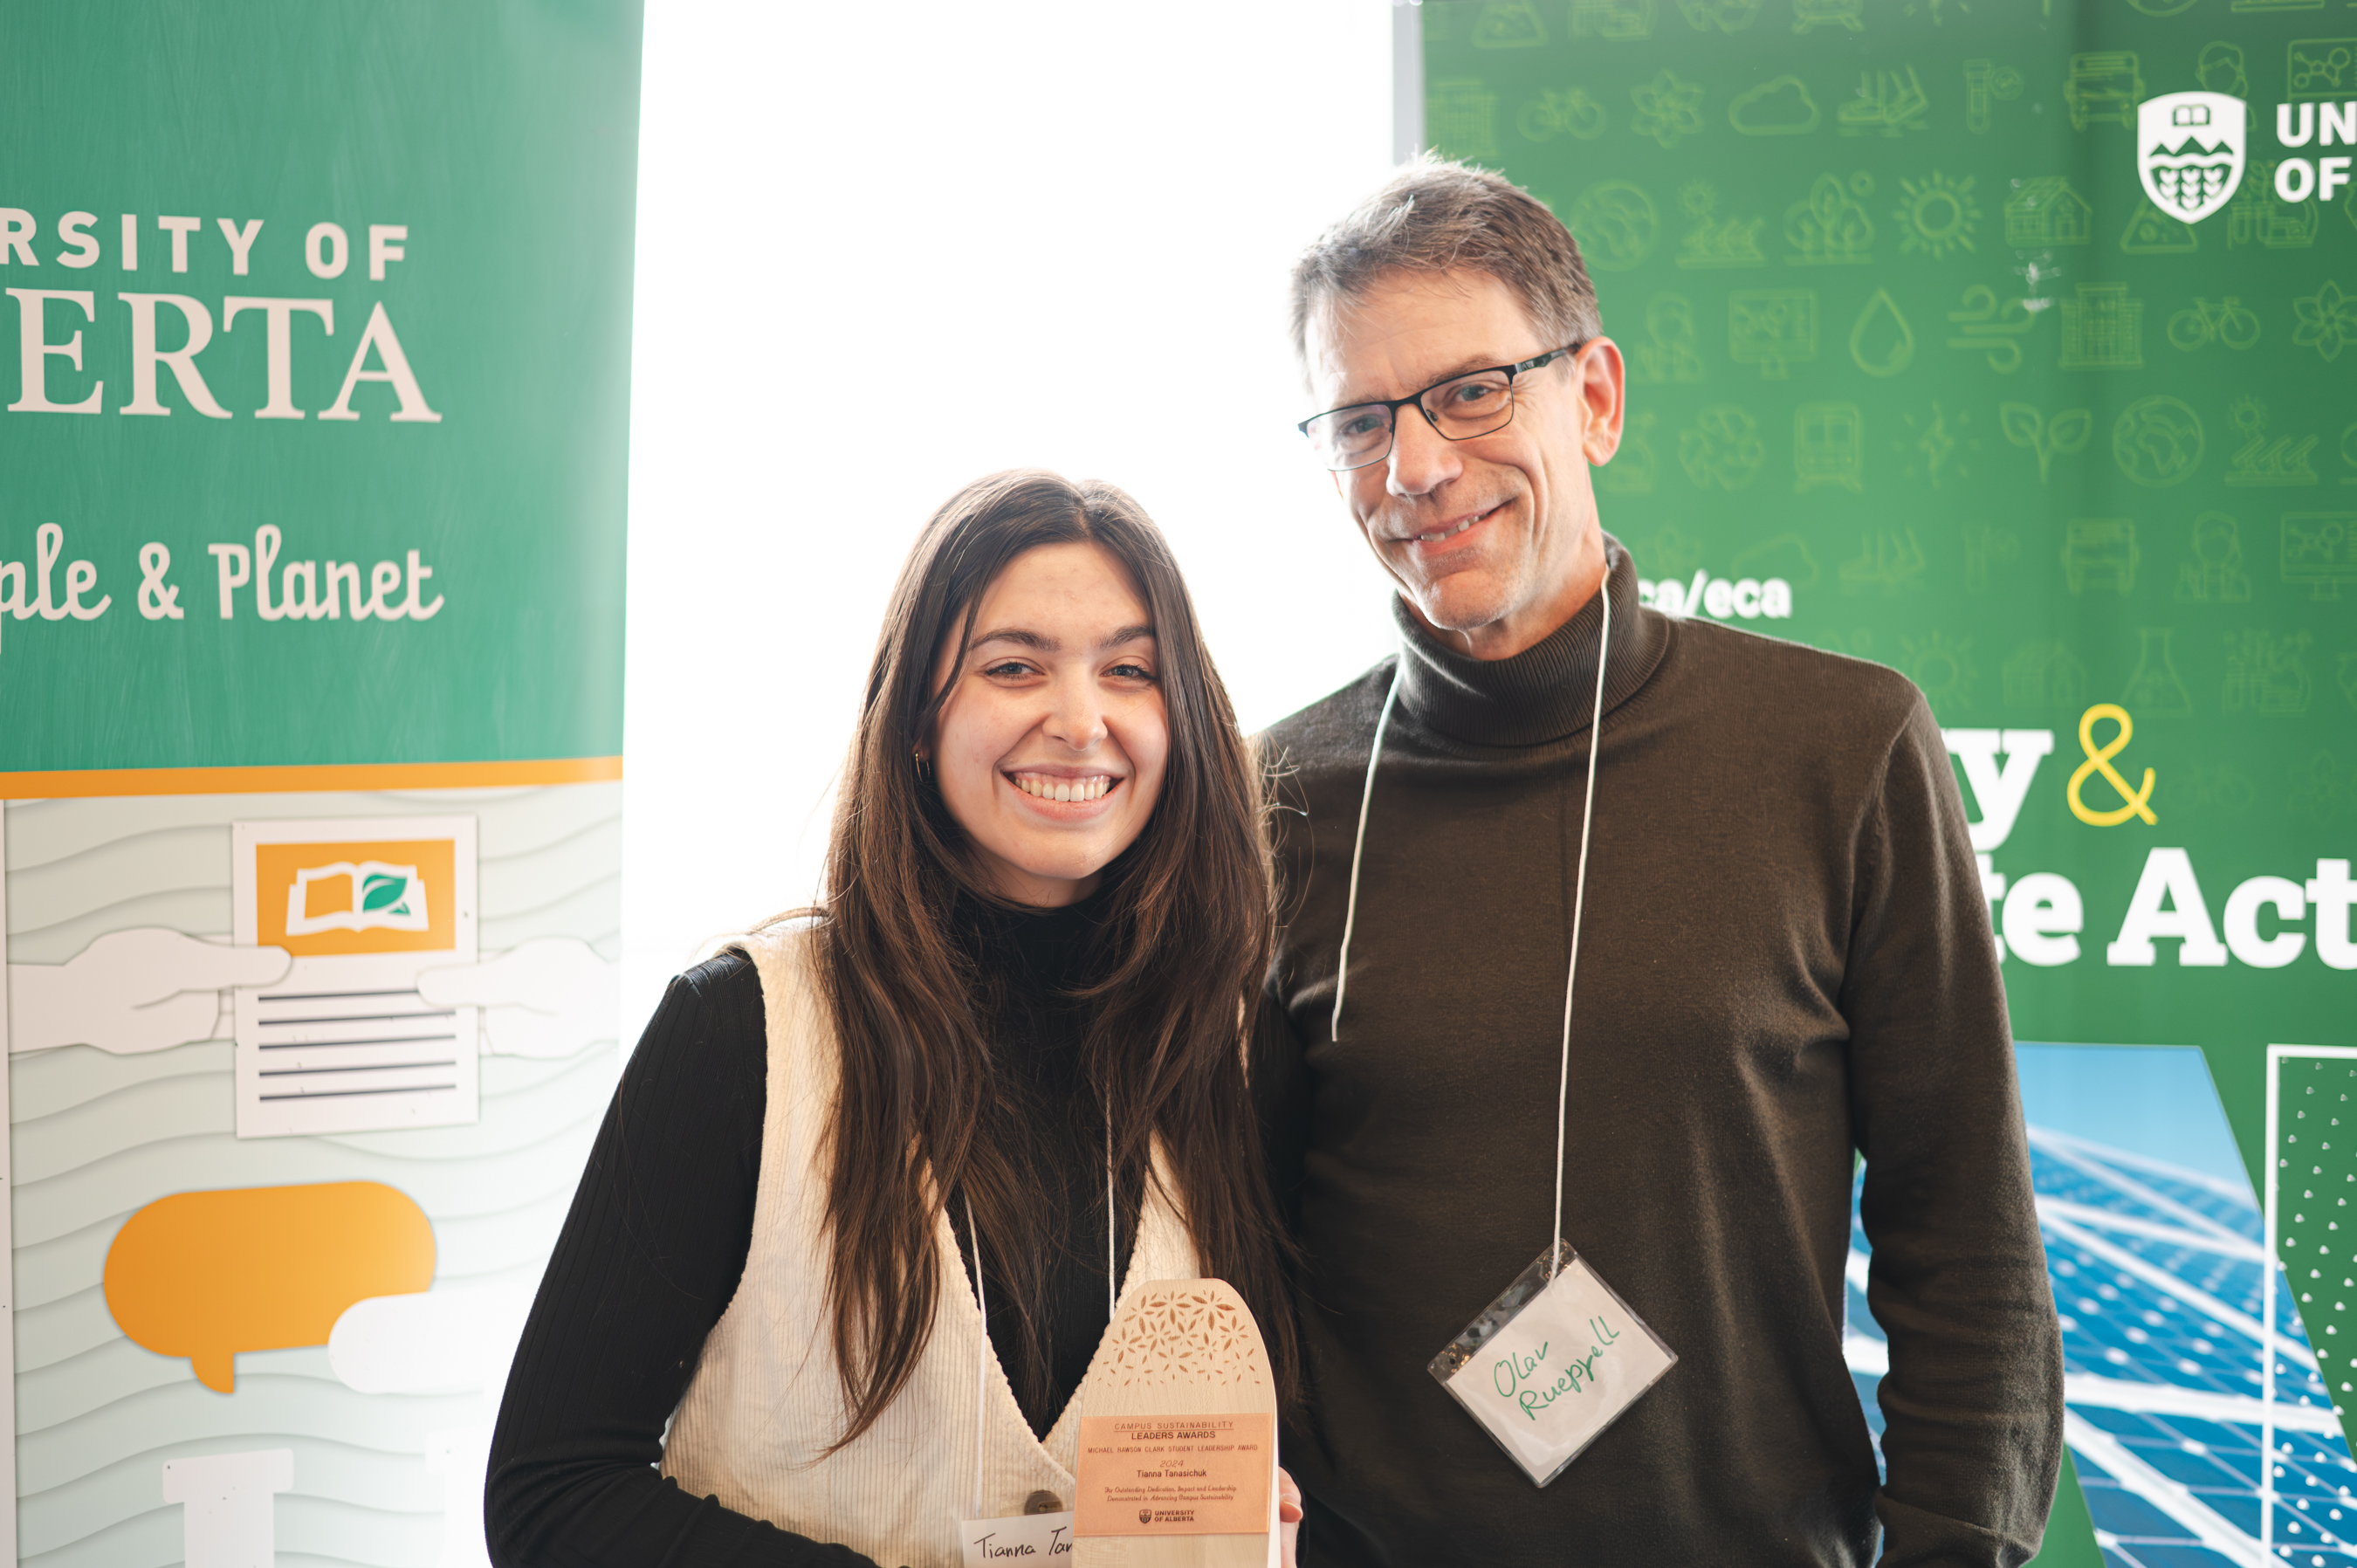 Tianna Tanasichuk smiling and holding her trophy, standing next to her principal investigator, Olav Rueppell.